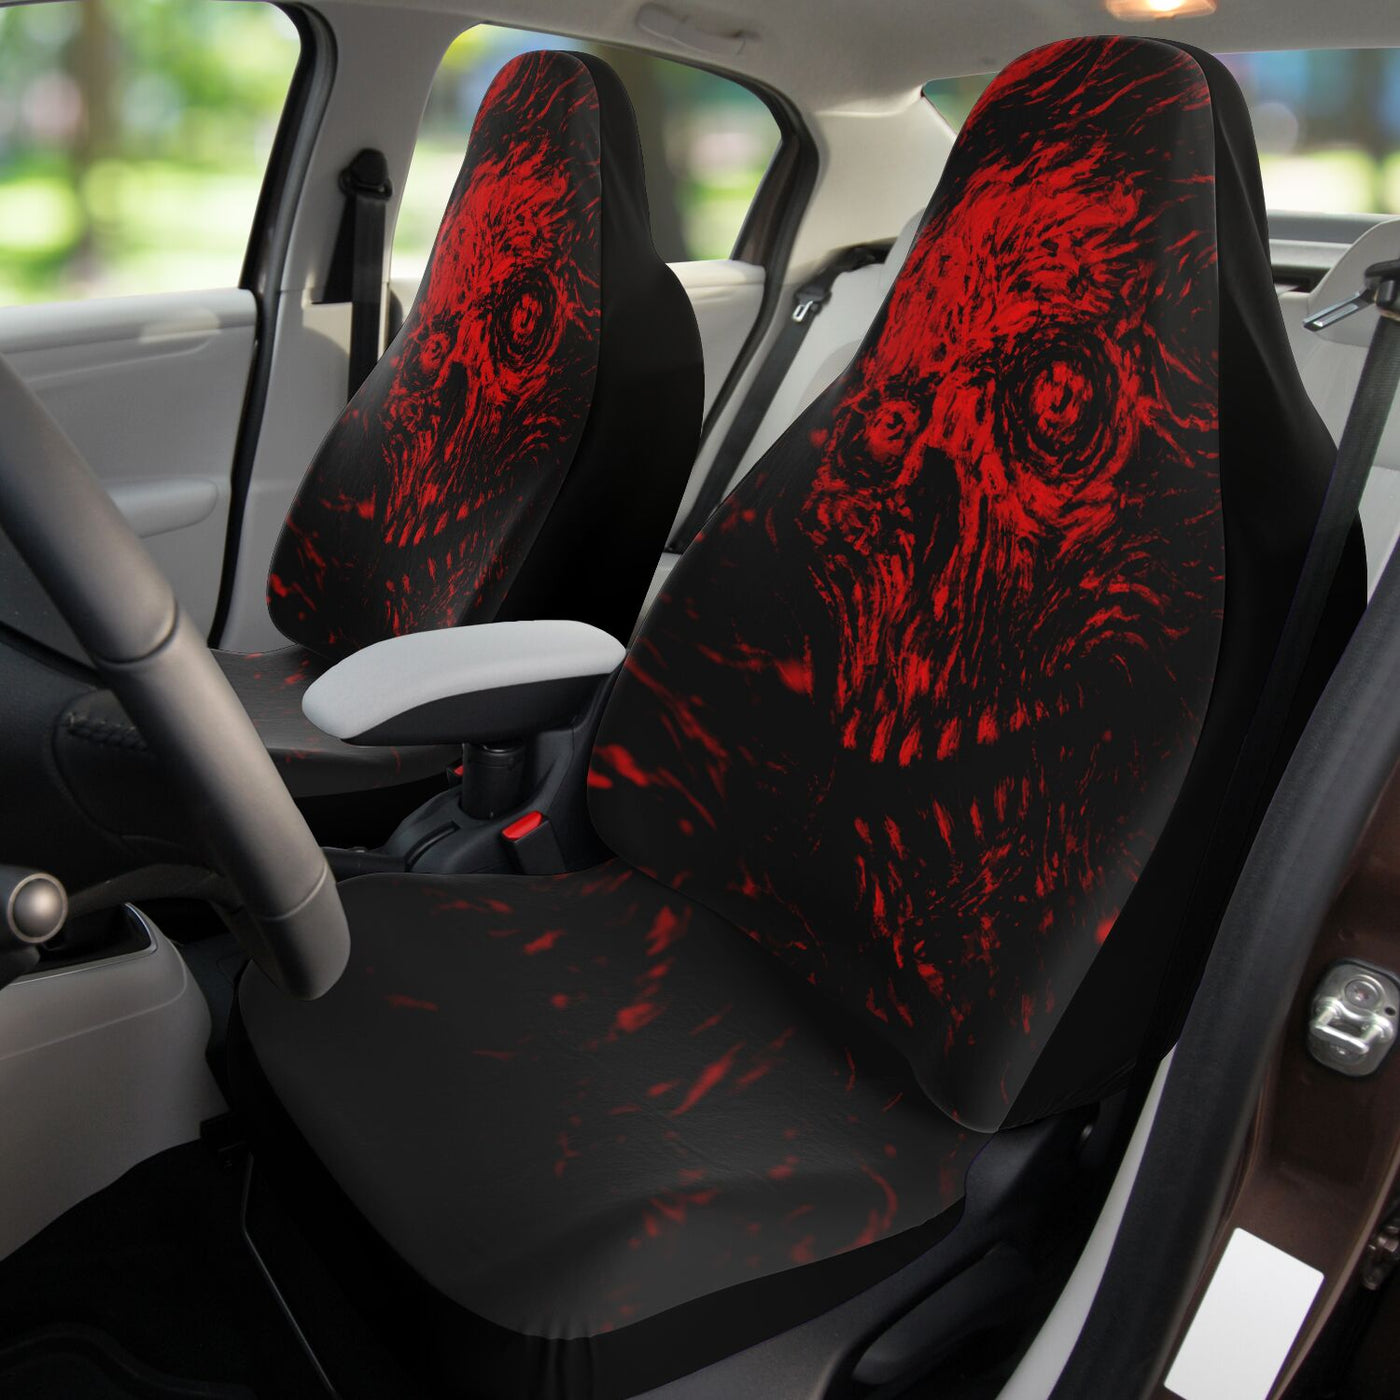 Black Red Zombie Horror Art | Car Seat Covers